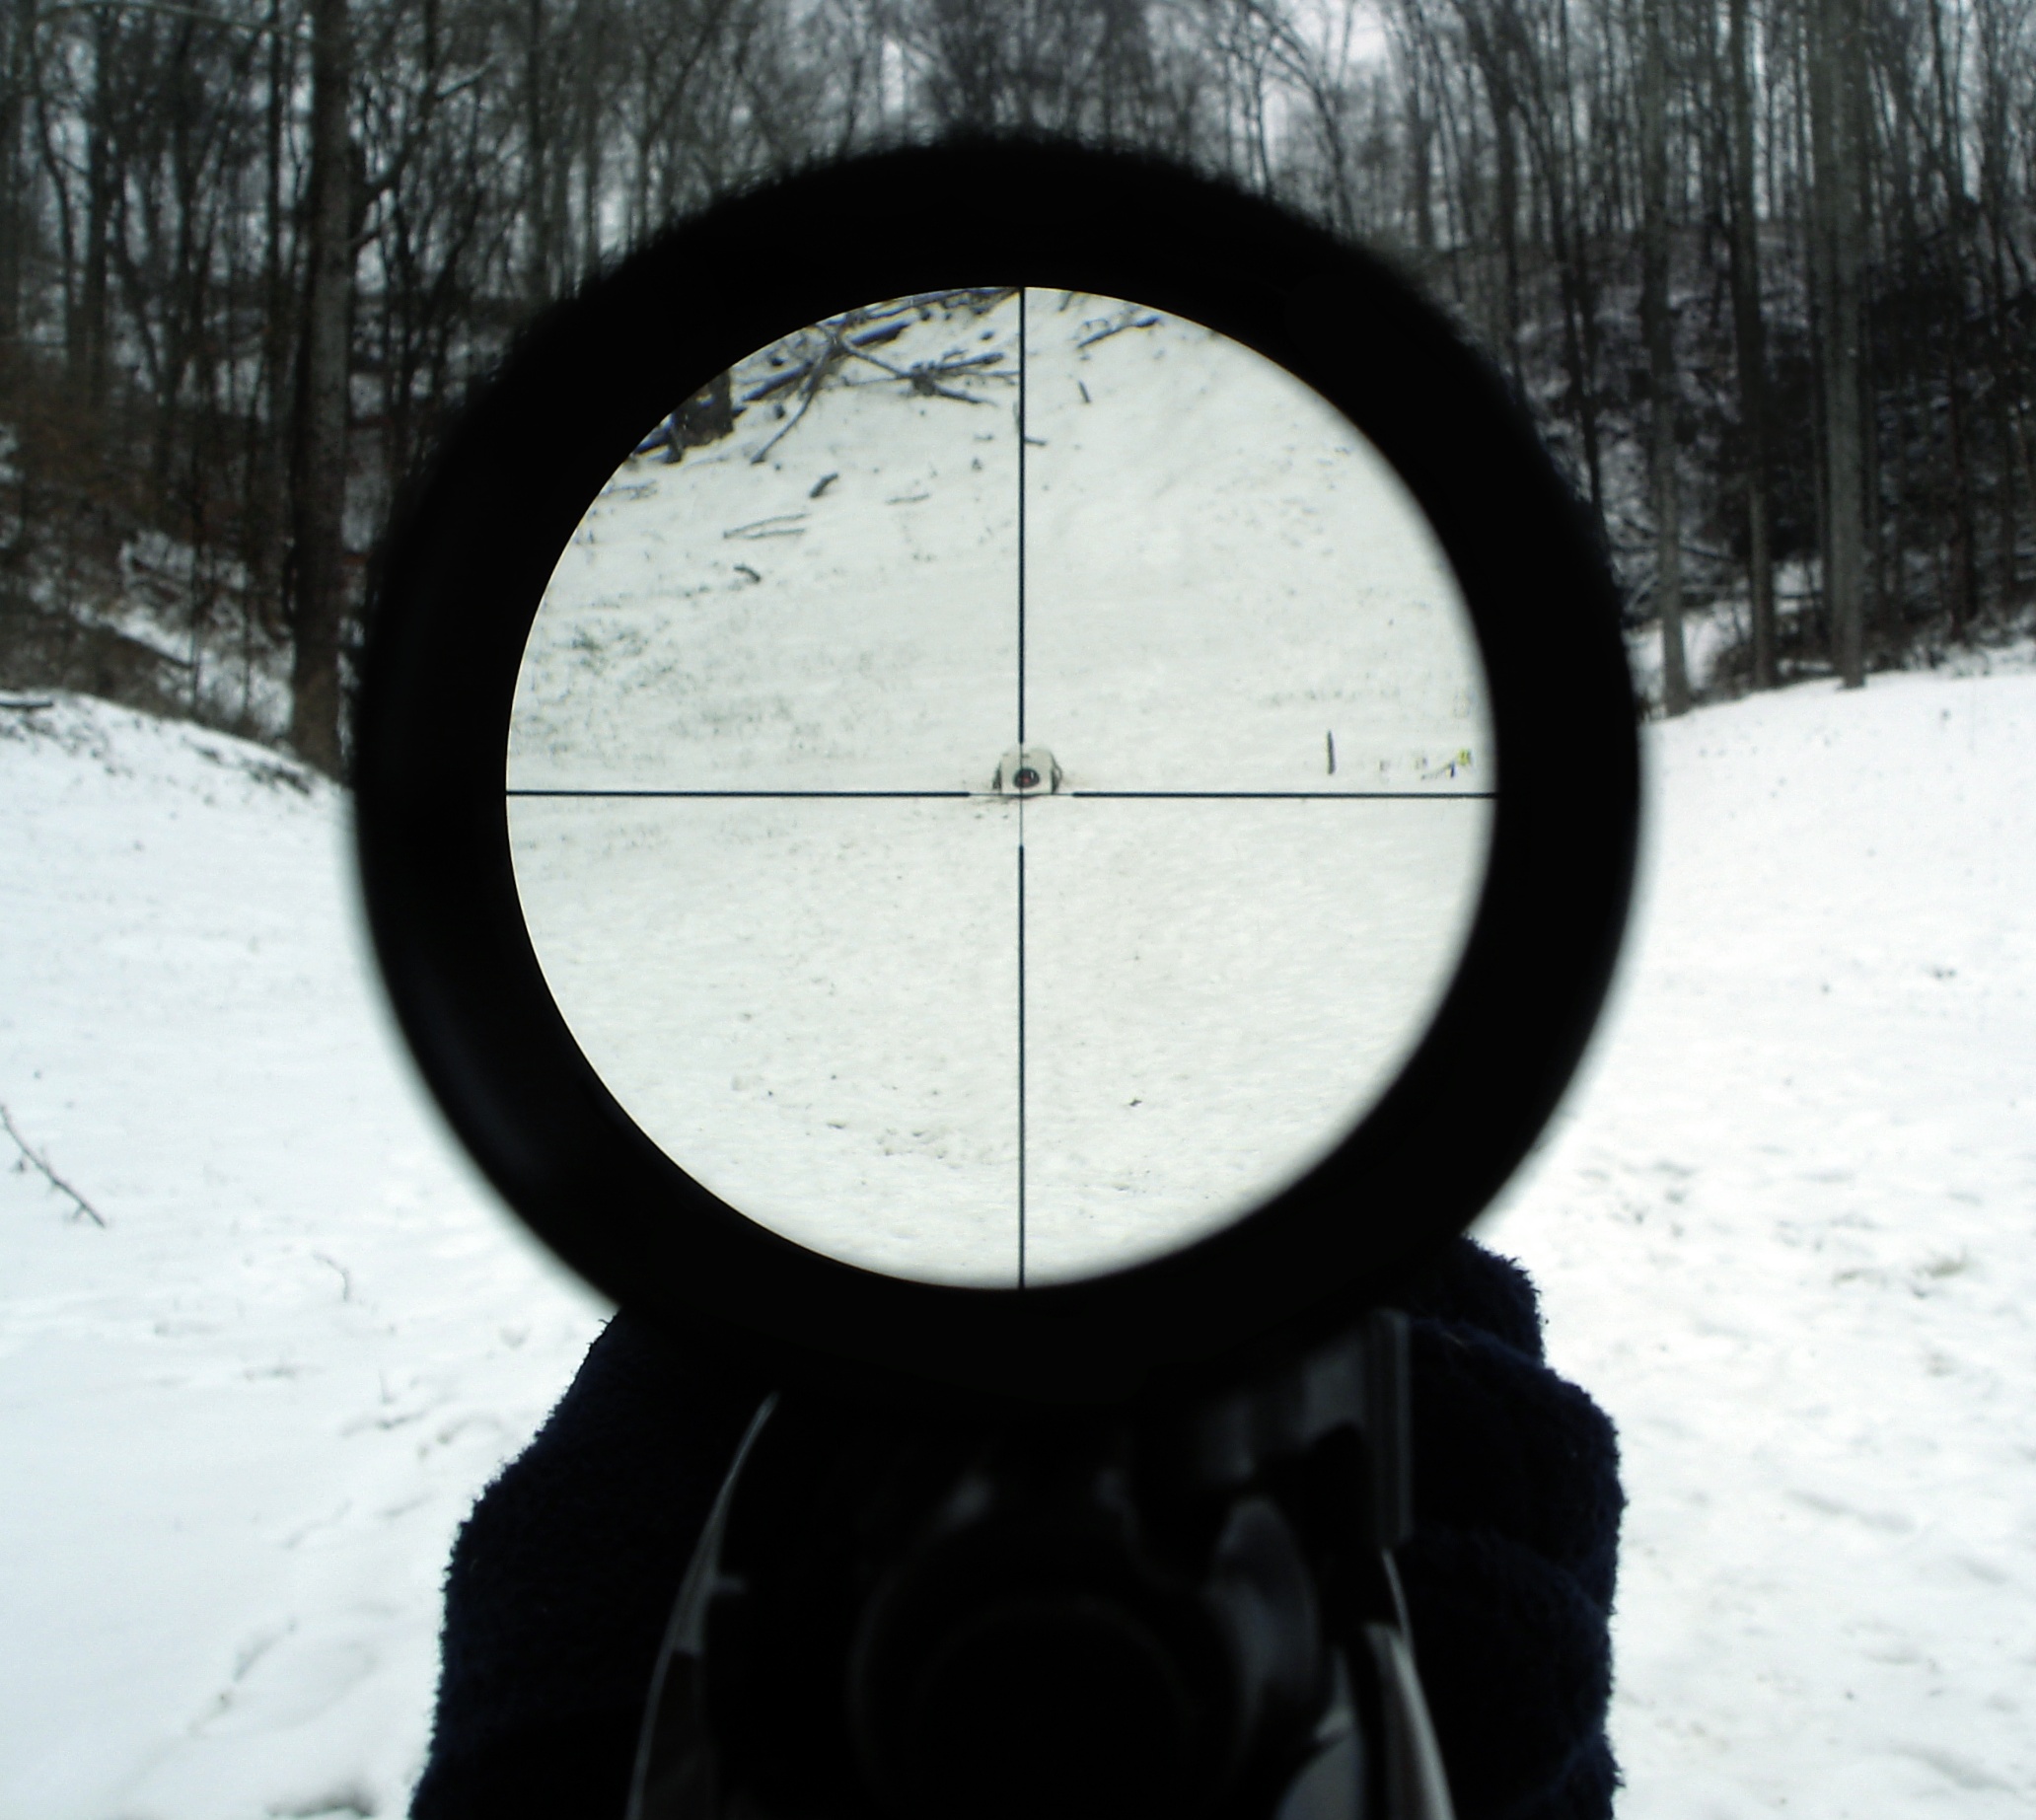 Sighting In A Rifle Scope At 50 Yards